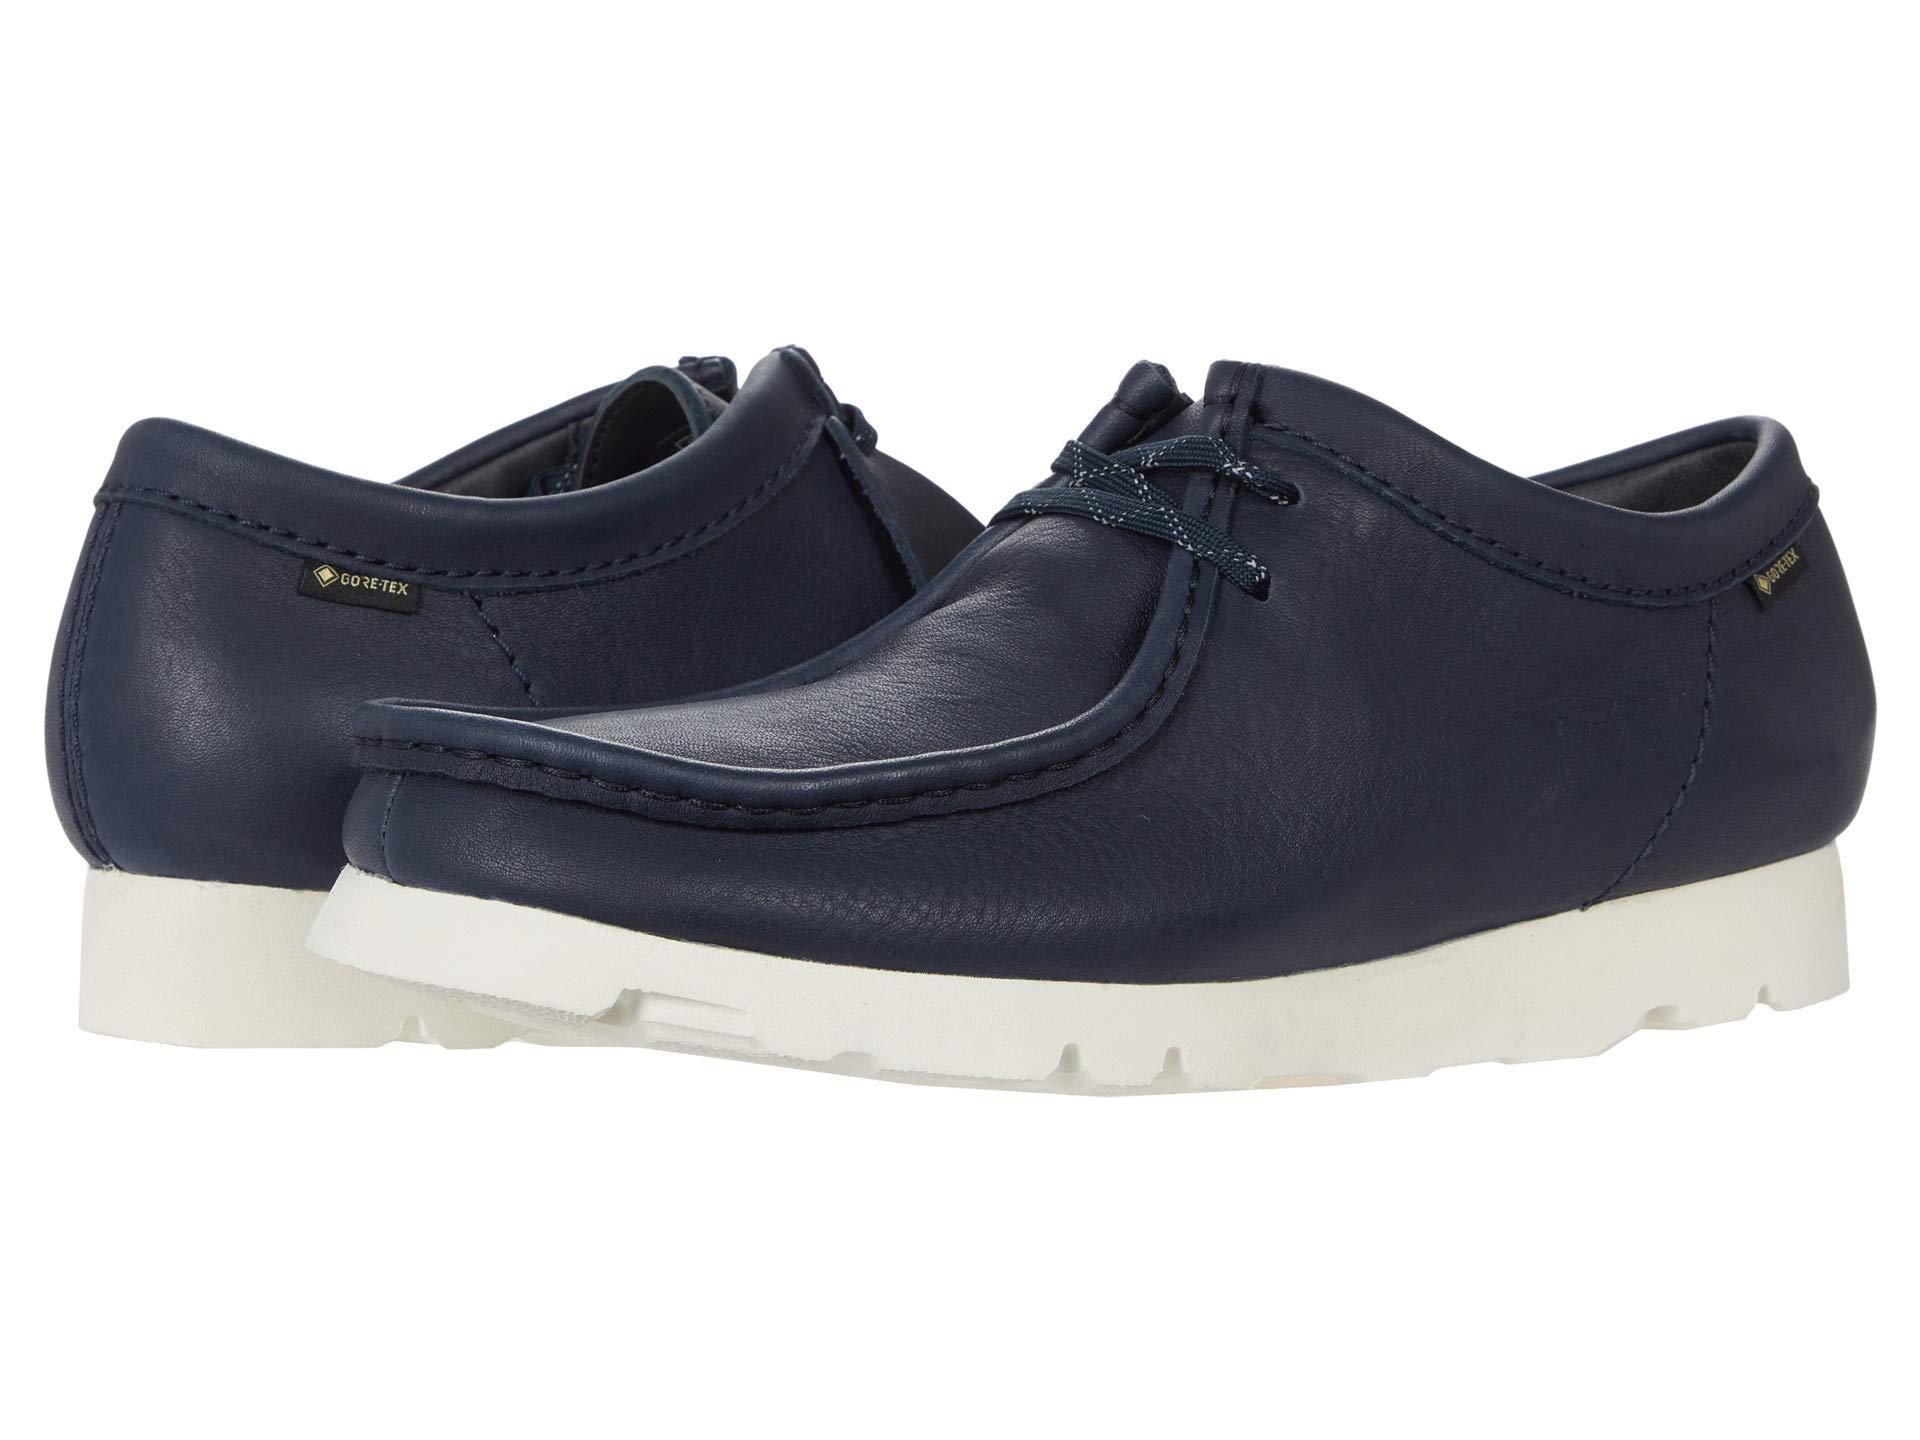 Clarks Leather Wallabee Gtx Shoes in Navy (Blue) for Men - Save 11% - Lyst